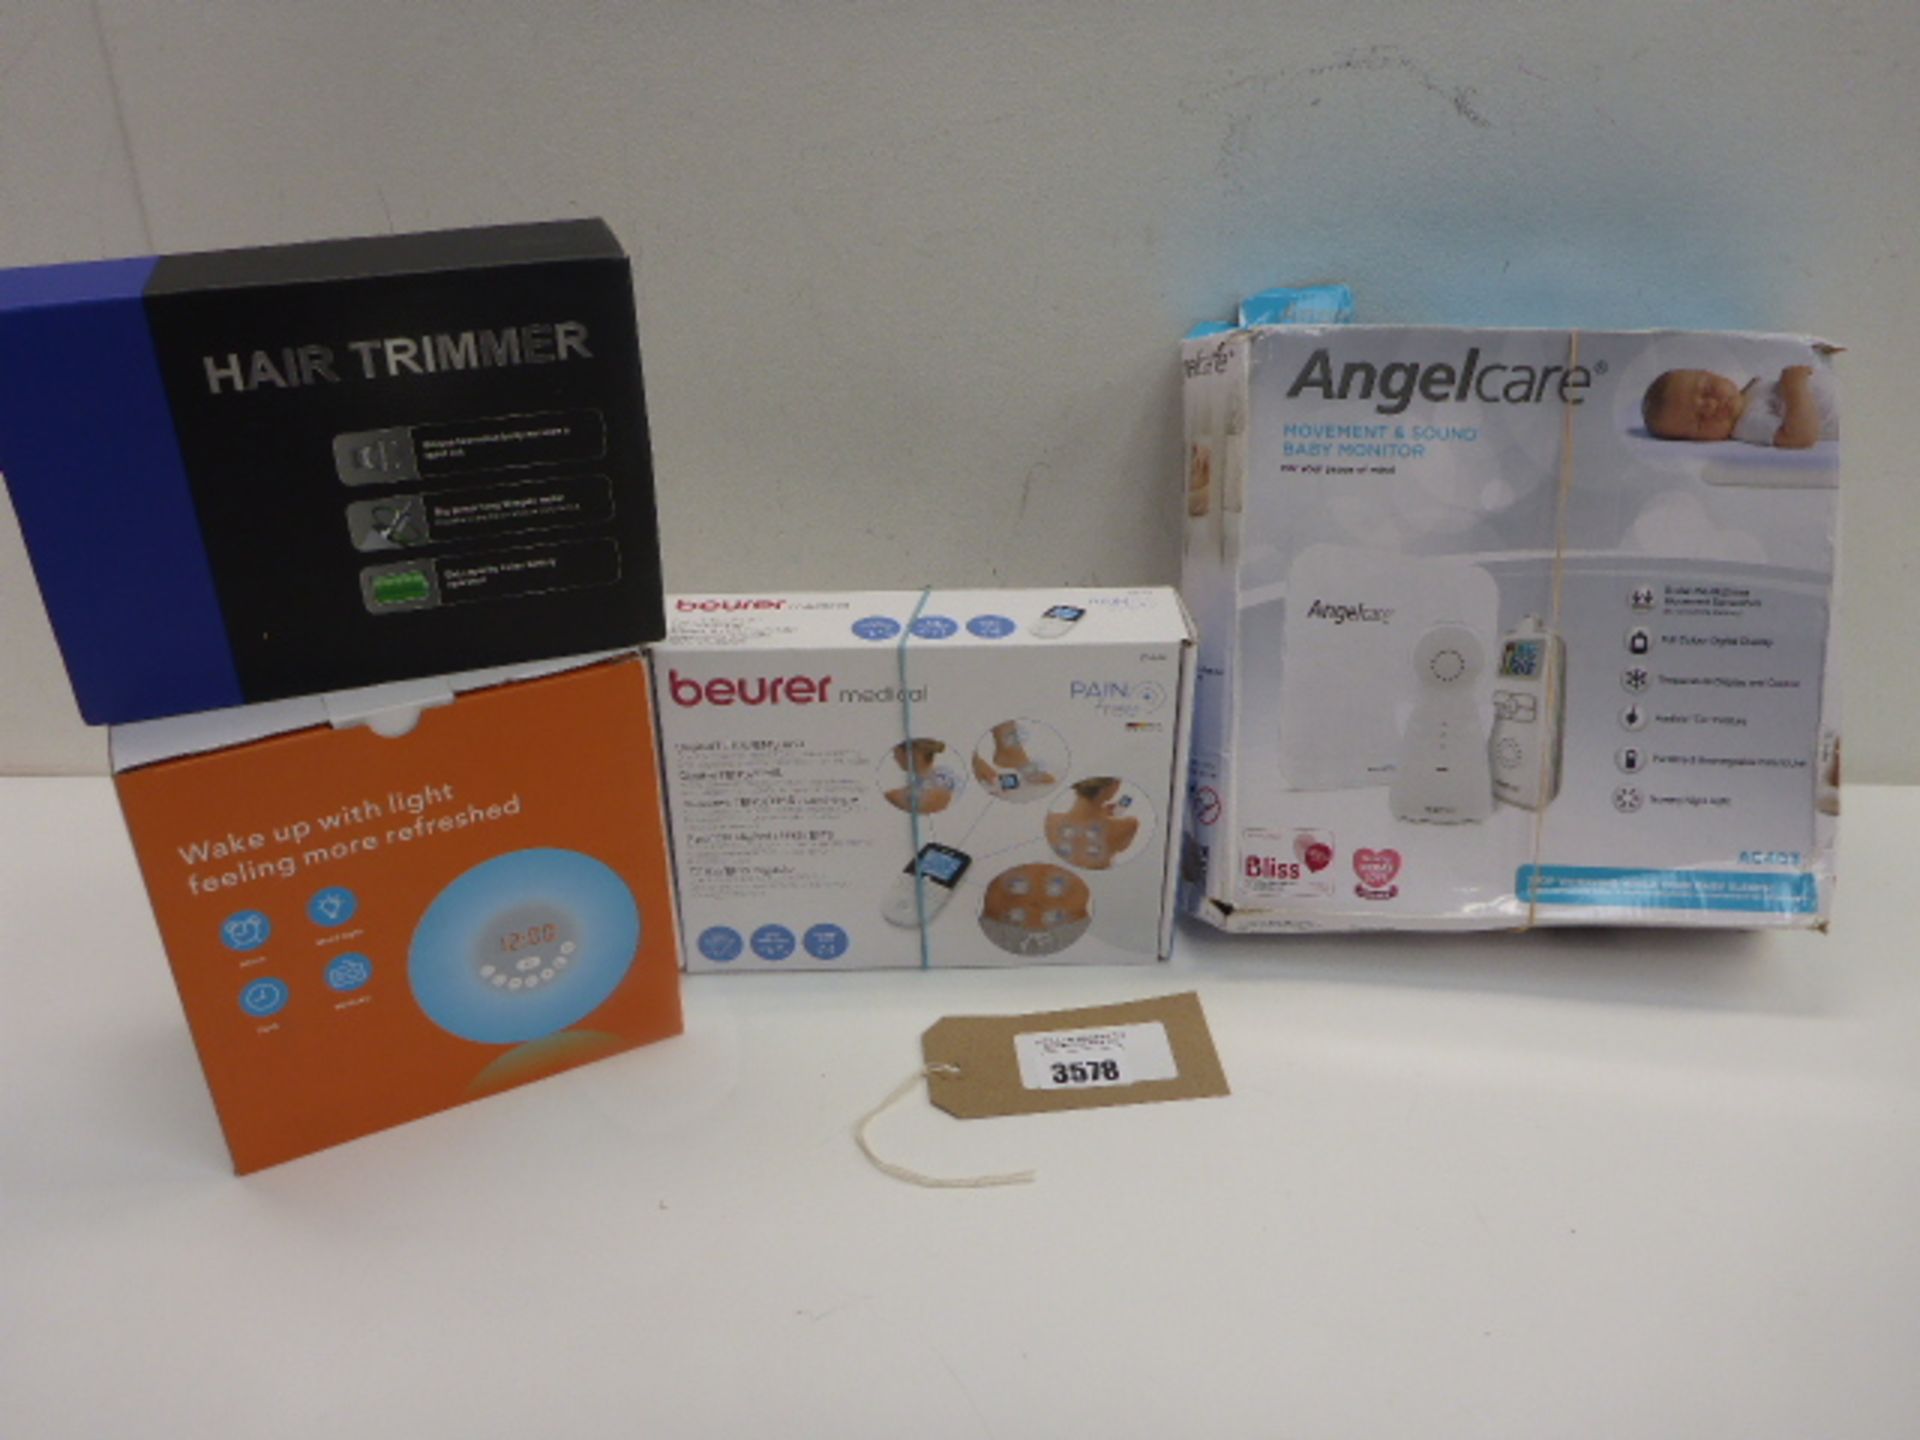 Anglecare baby motion and sound monitor, Hair trimmer set, Wake Up light and Beurer Medical